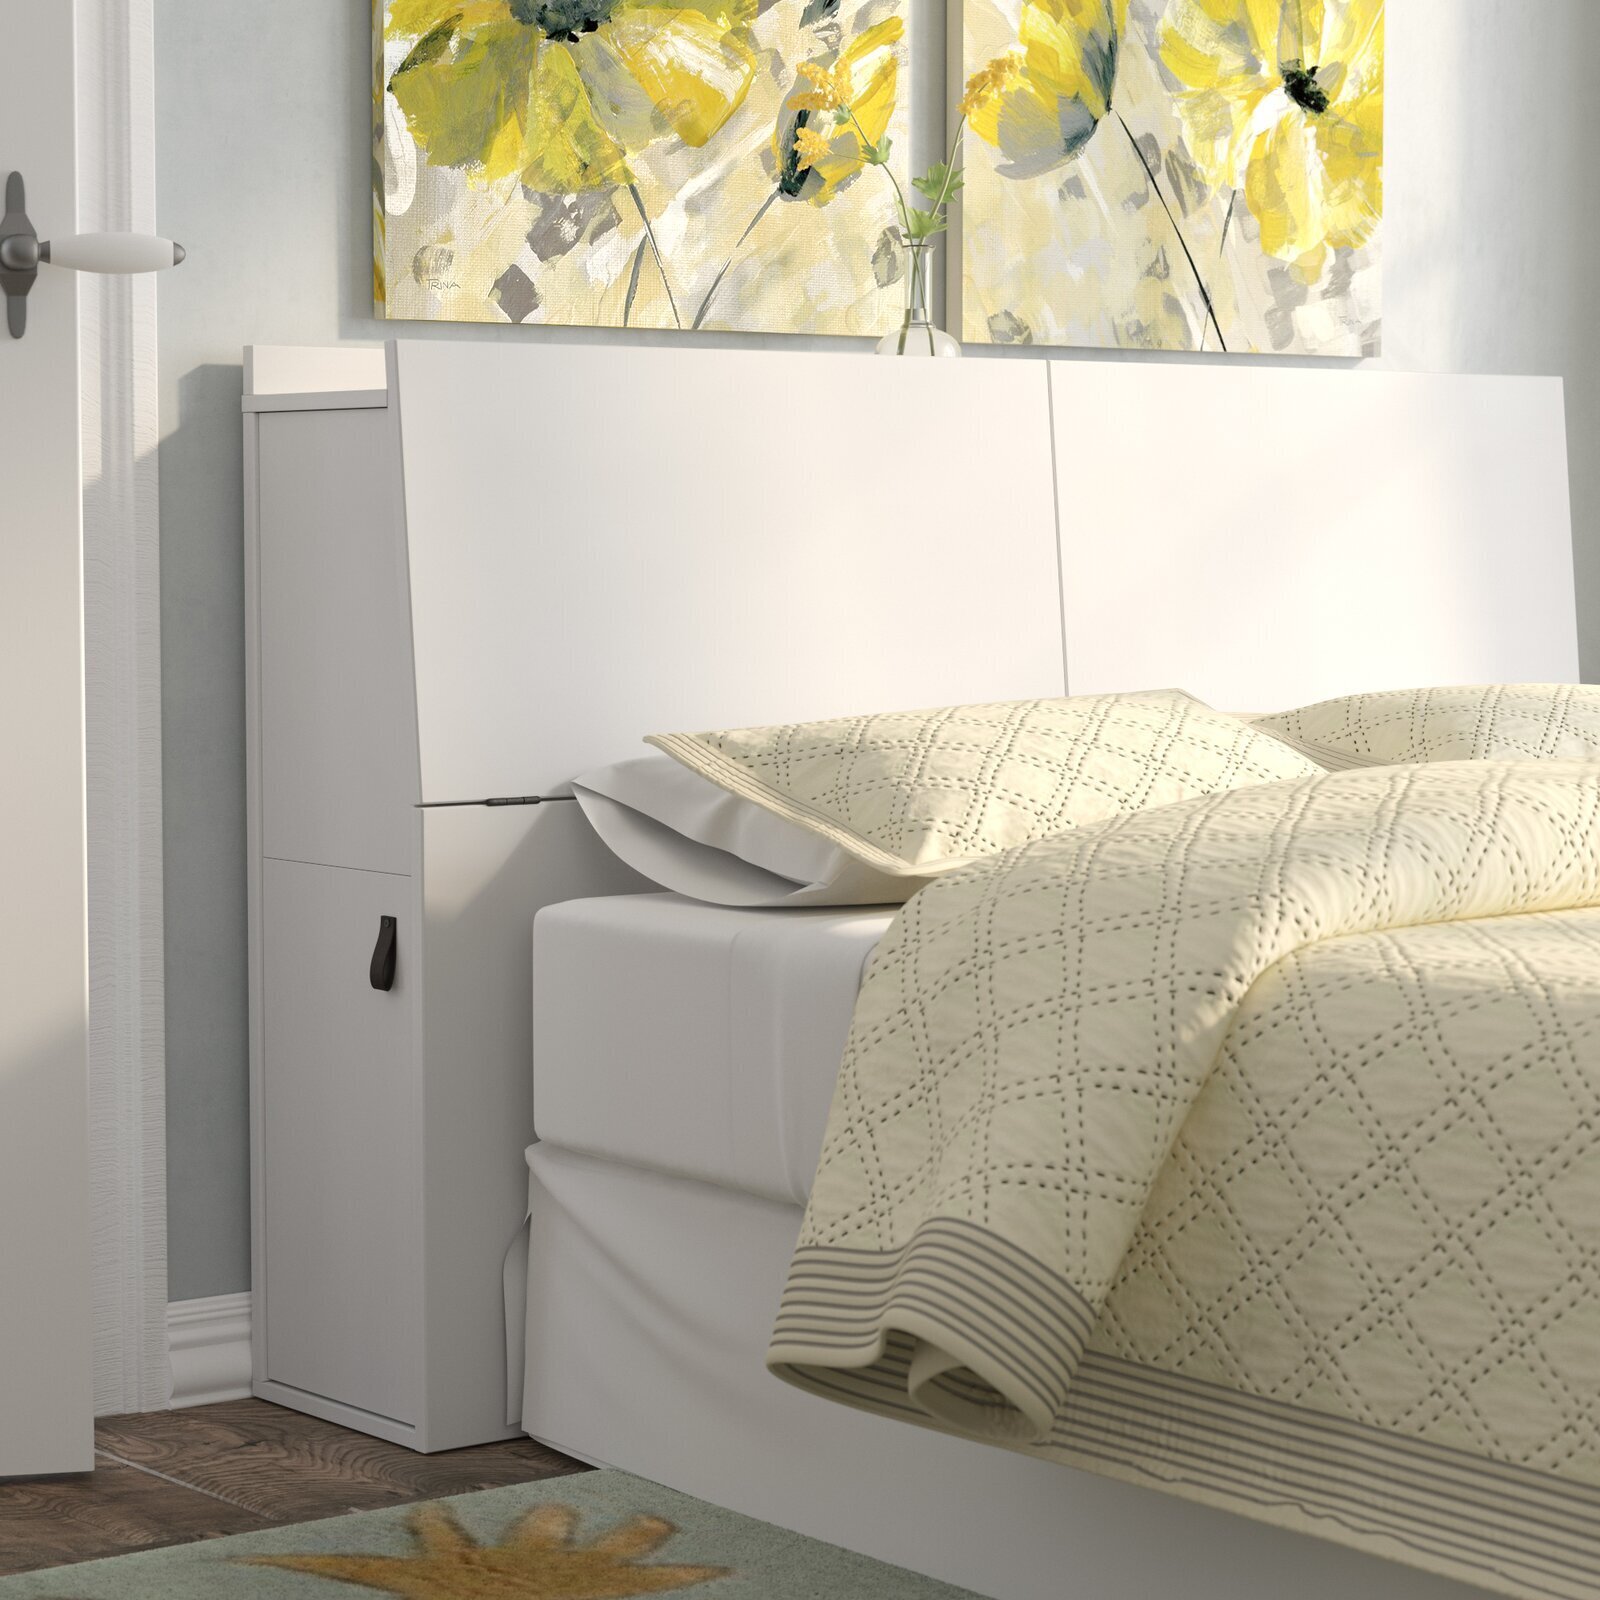 Storage headboard with secret compartments all over